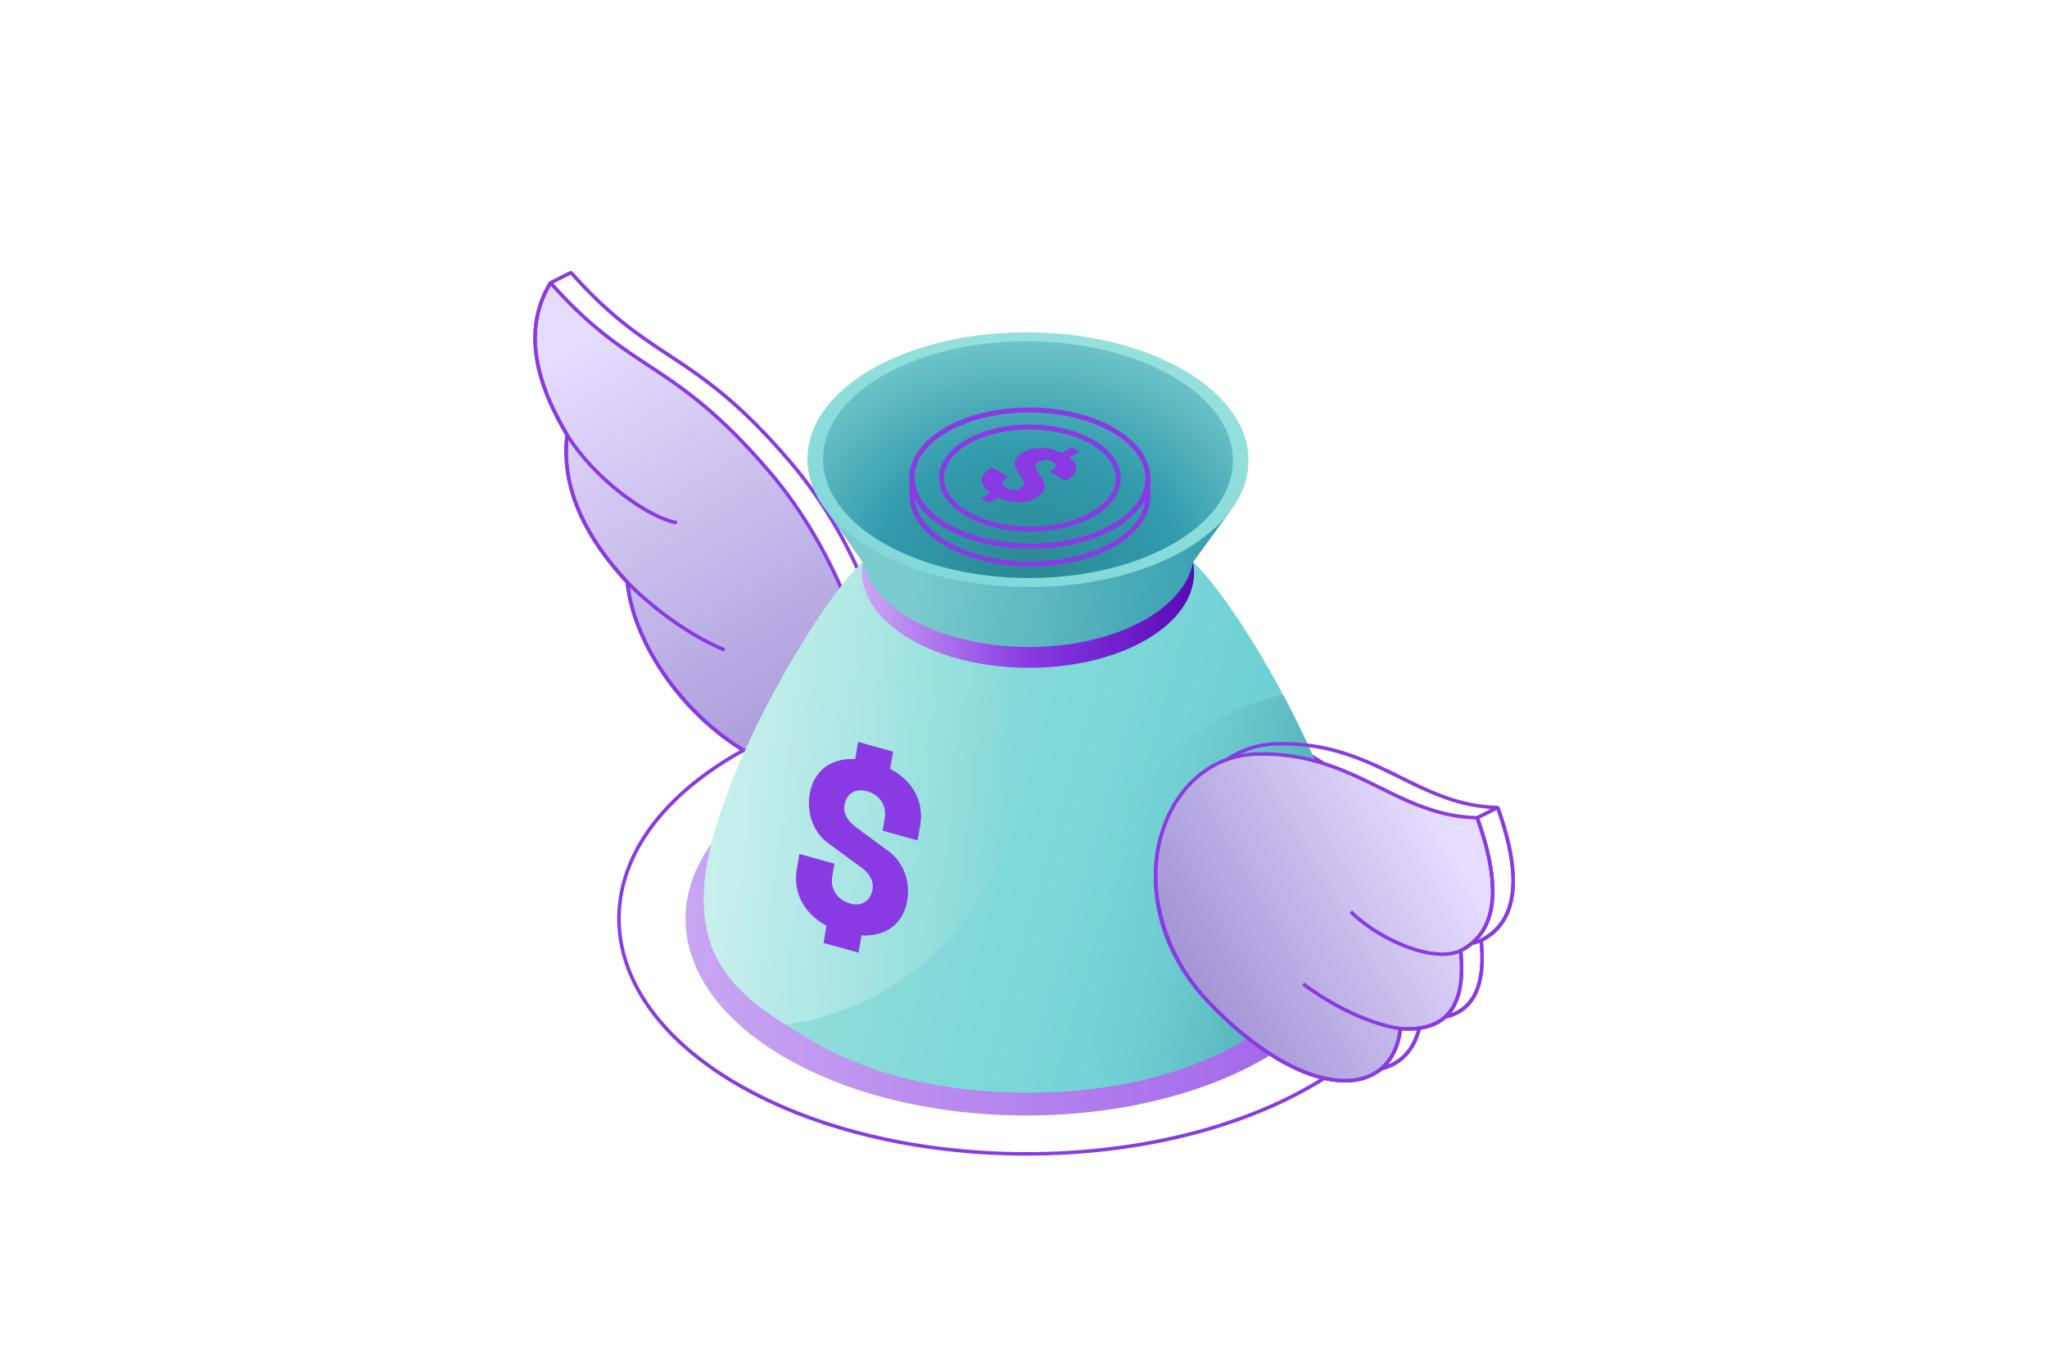 About Angel Investors